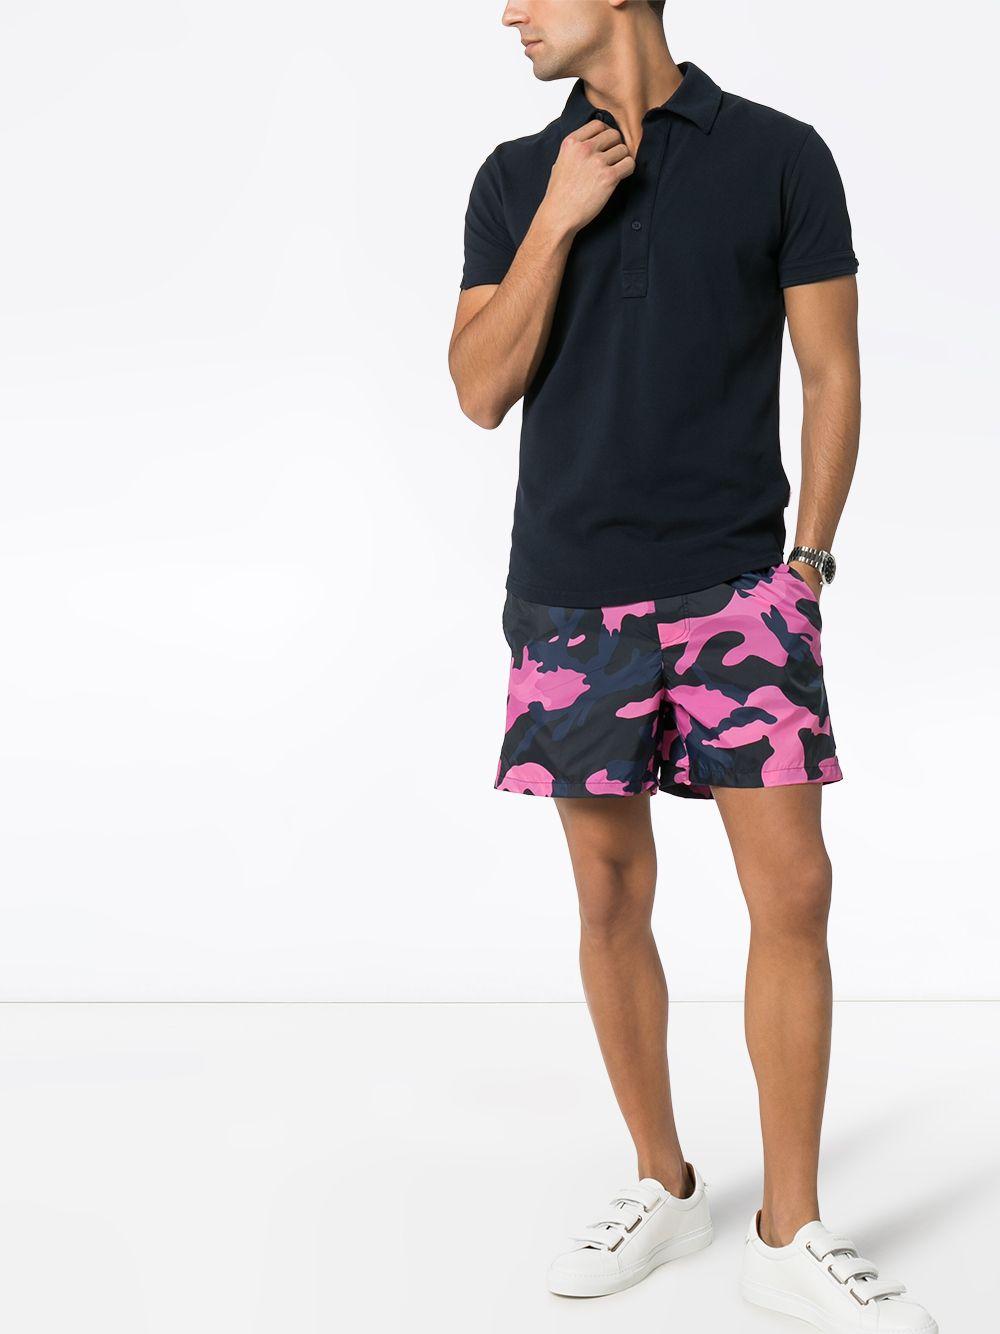 Valentino Synthetic Camouflage Swim Shorts in Pink for Men - Lyst